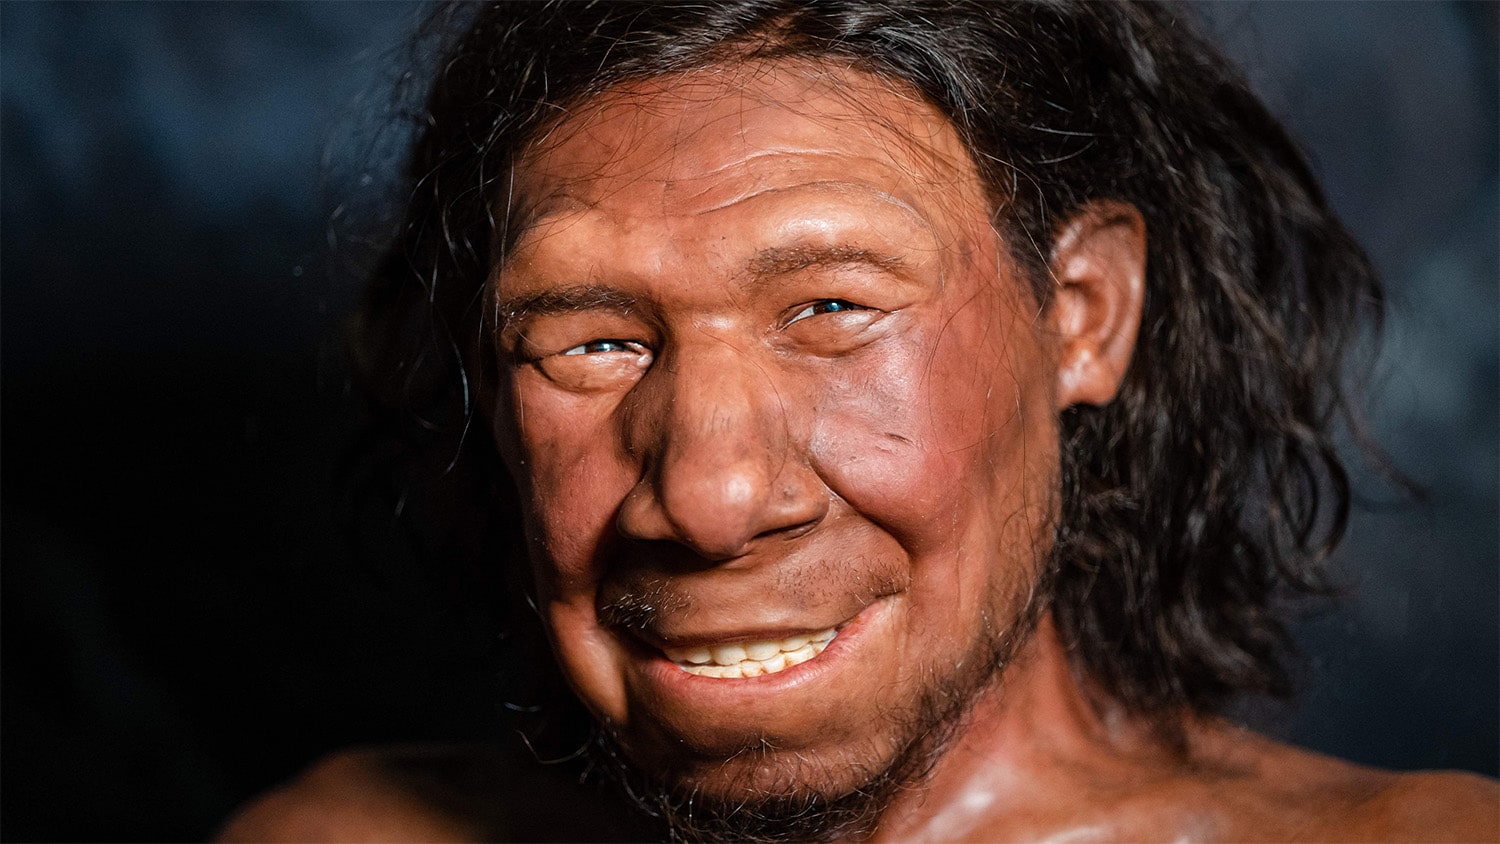 27 interesting facts about Neanderthals